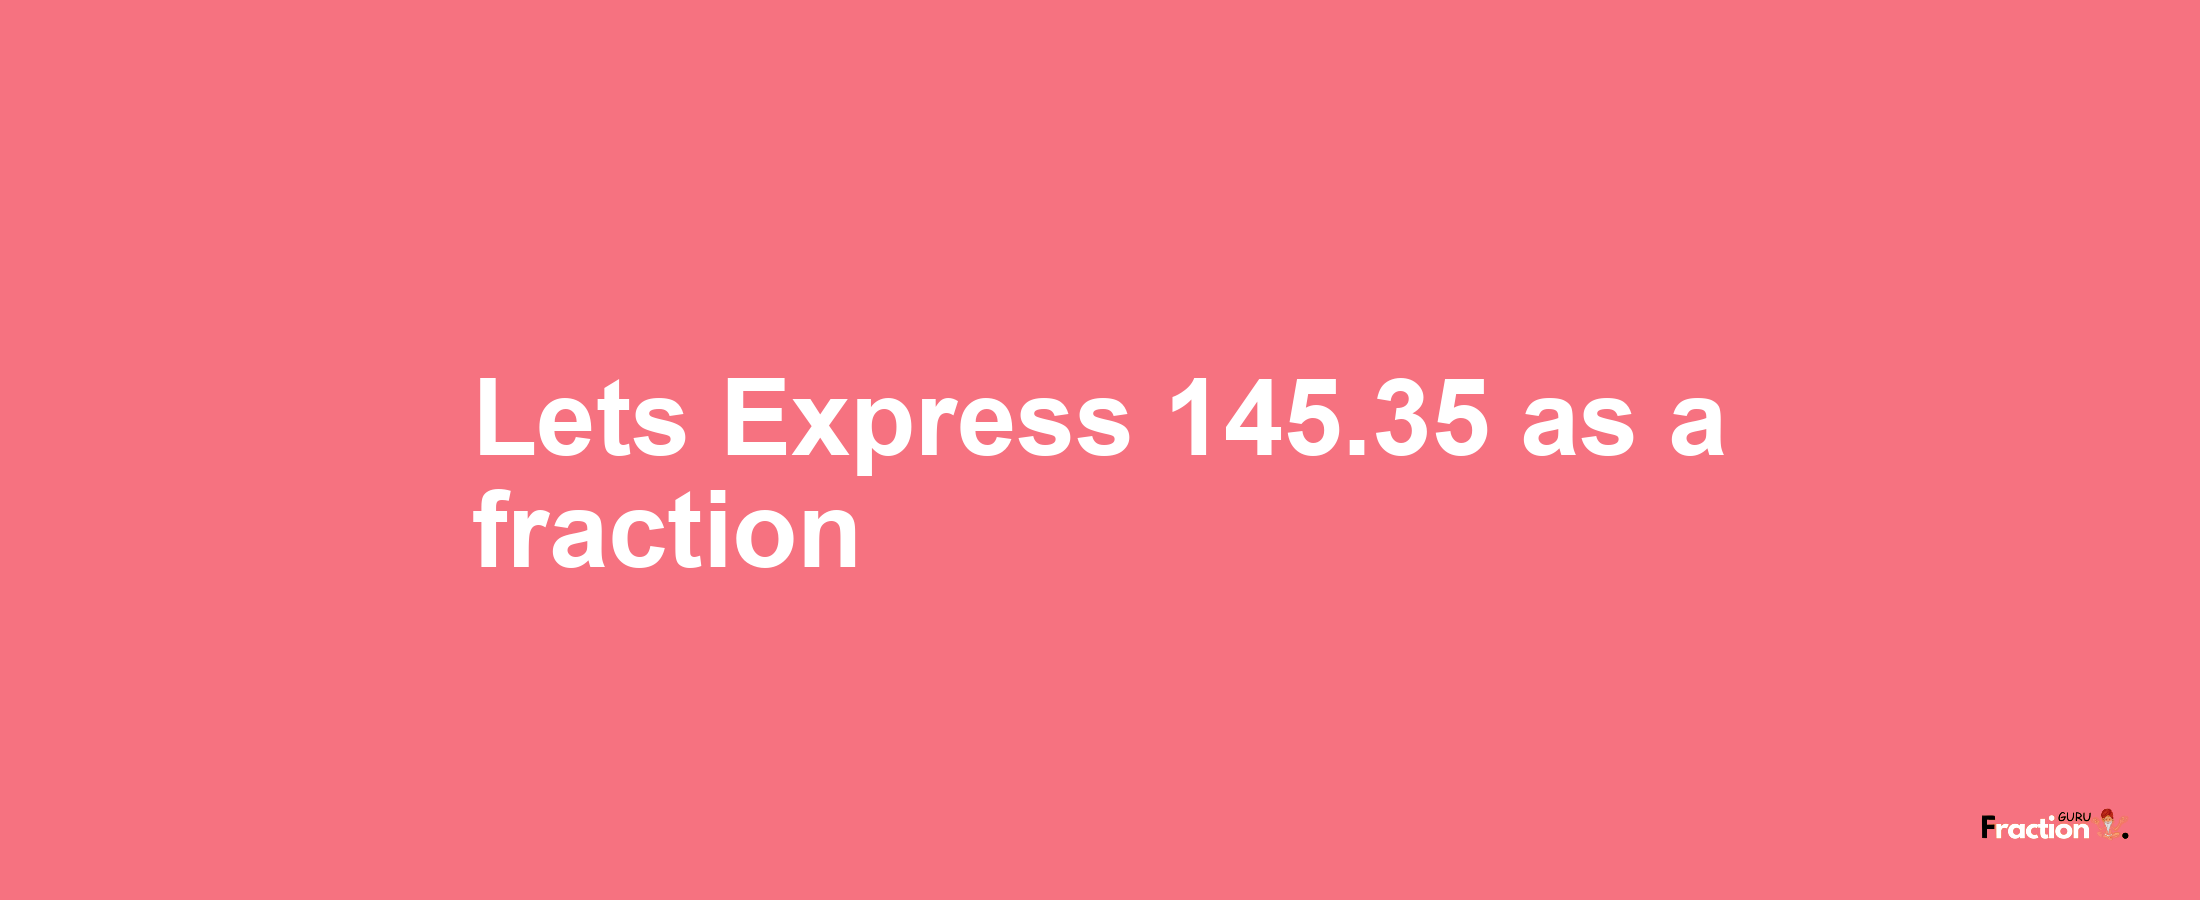 Lets Express 145.35 as afraction